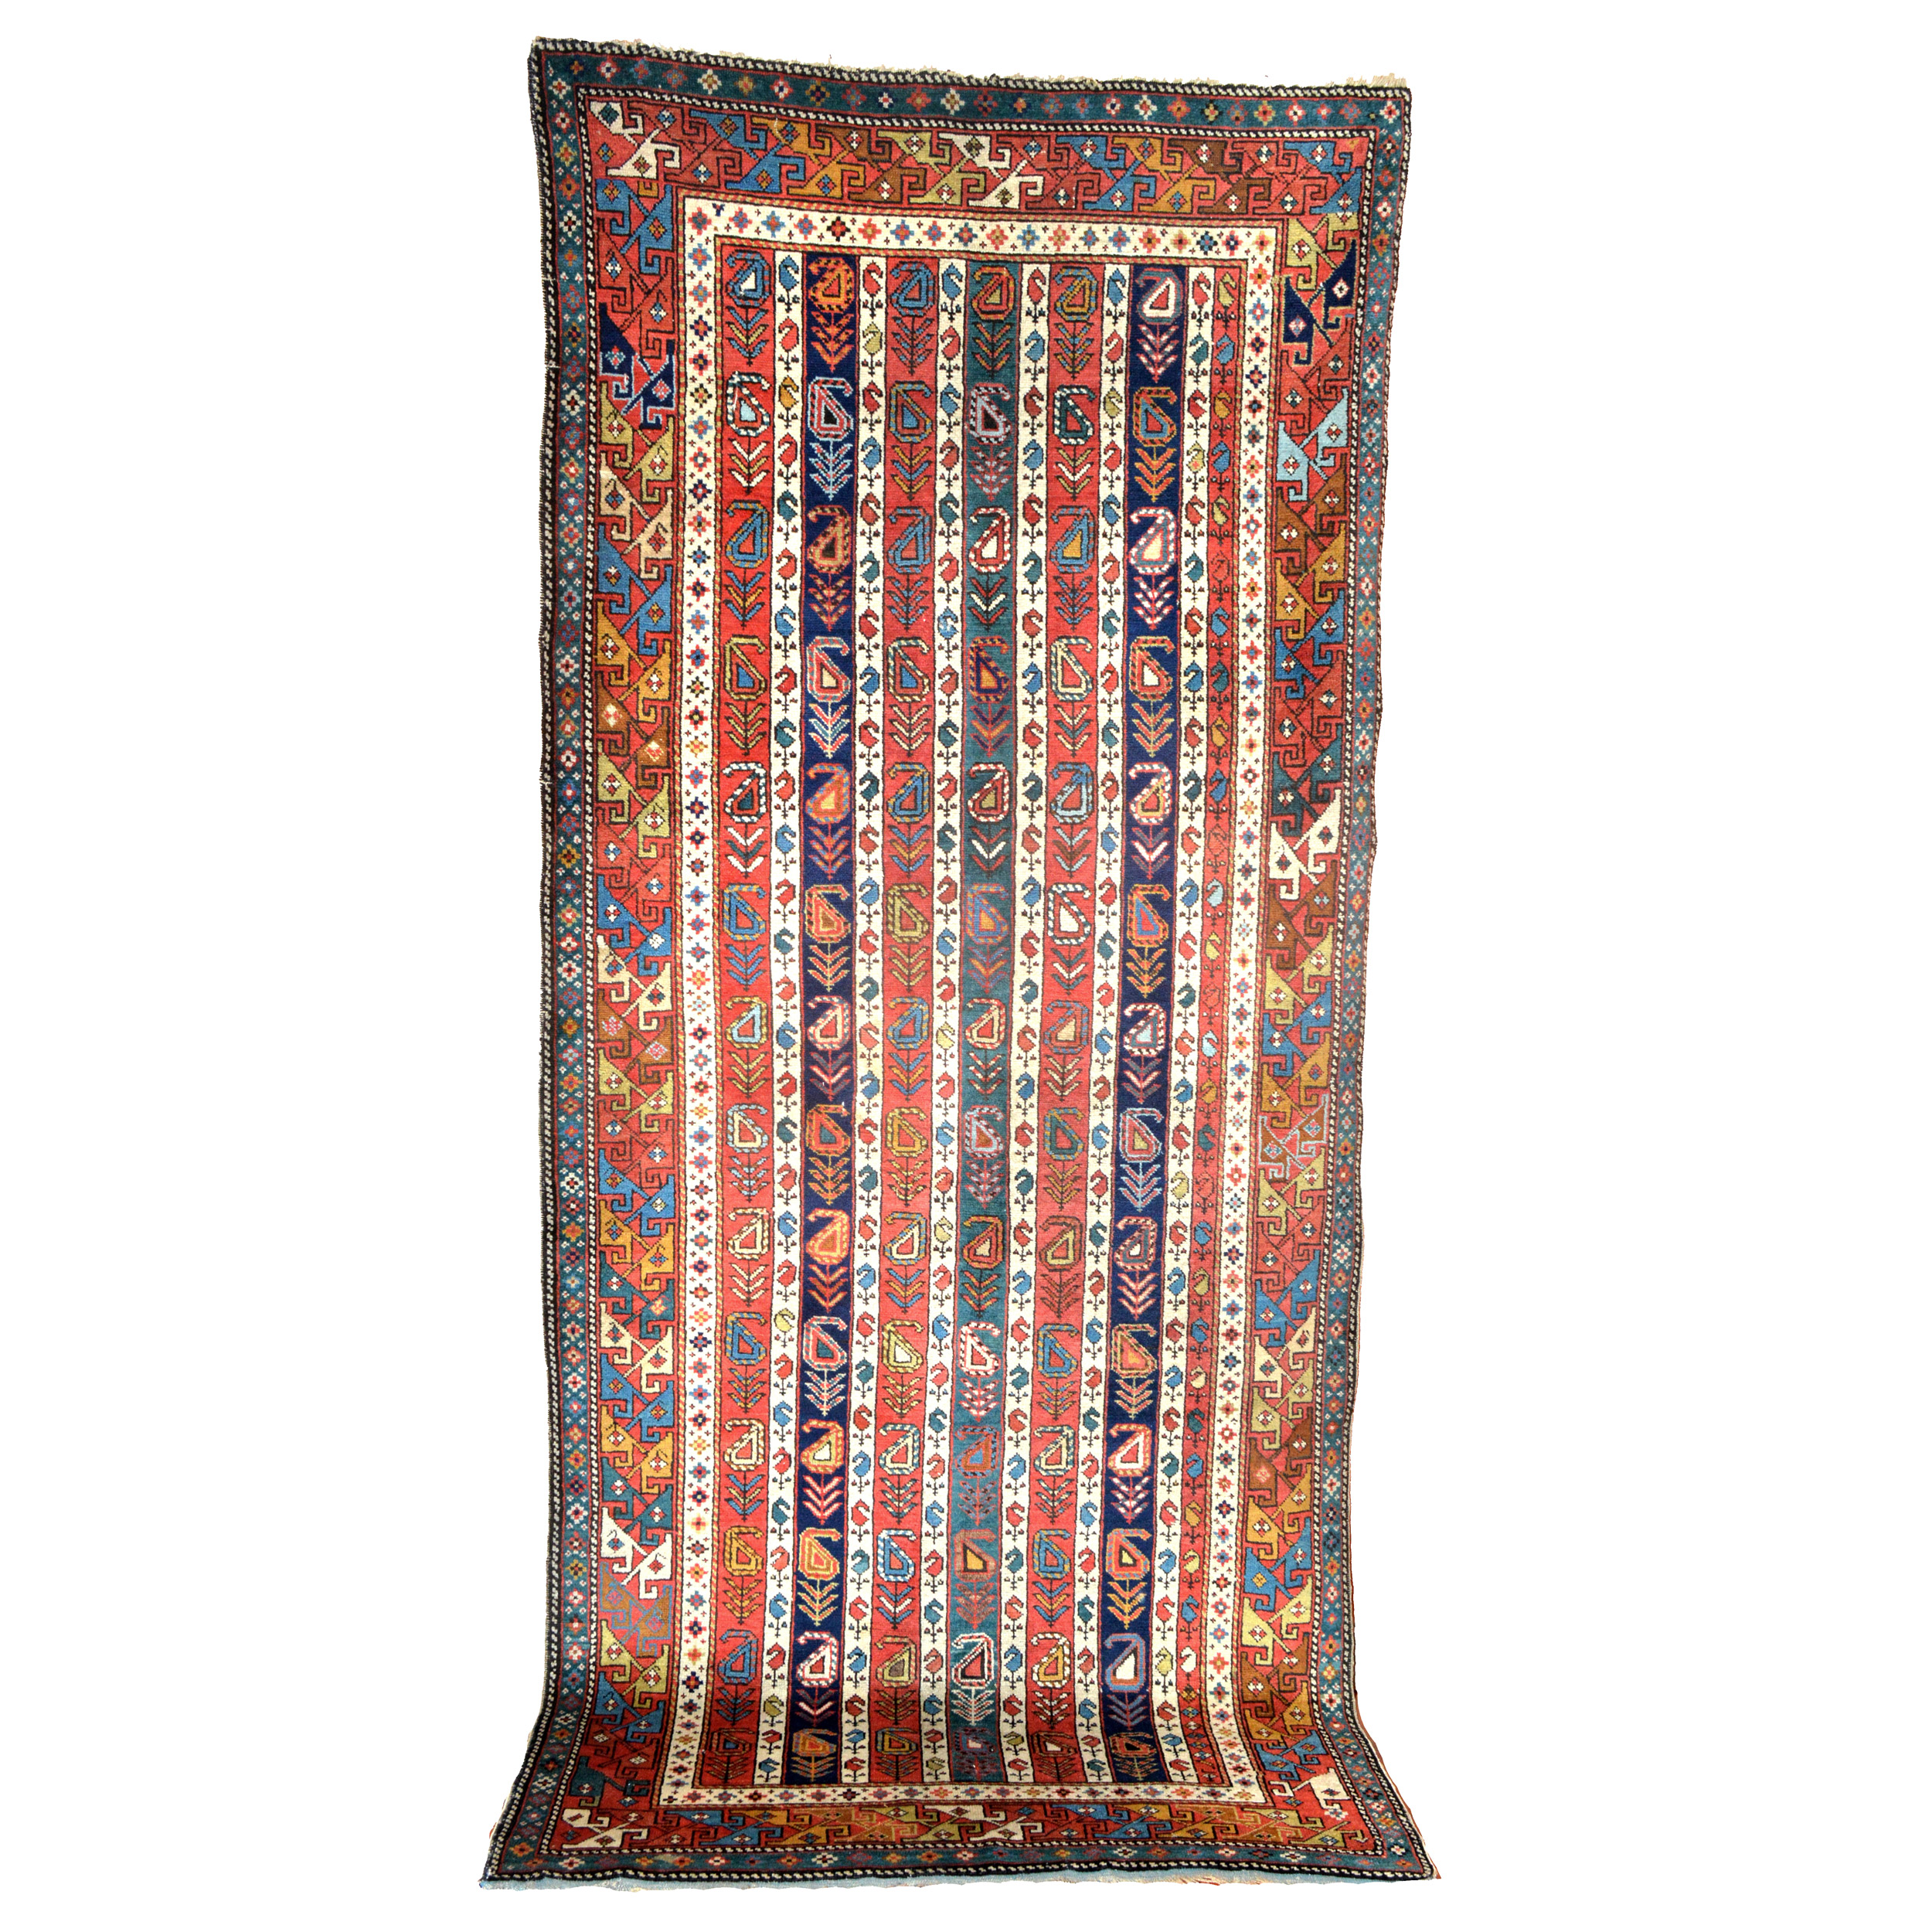 Antique Caucasian Shirvan long rug with polychromatic vertical stripes containing Boteh (Paisley shape motifs), late 19th century - Douglas Stock Gallery, antique Oriental rugs, Boston,MA area, antique Caucasian rugs, antique runners, tribal rugs, Oriental rugs New England